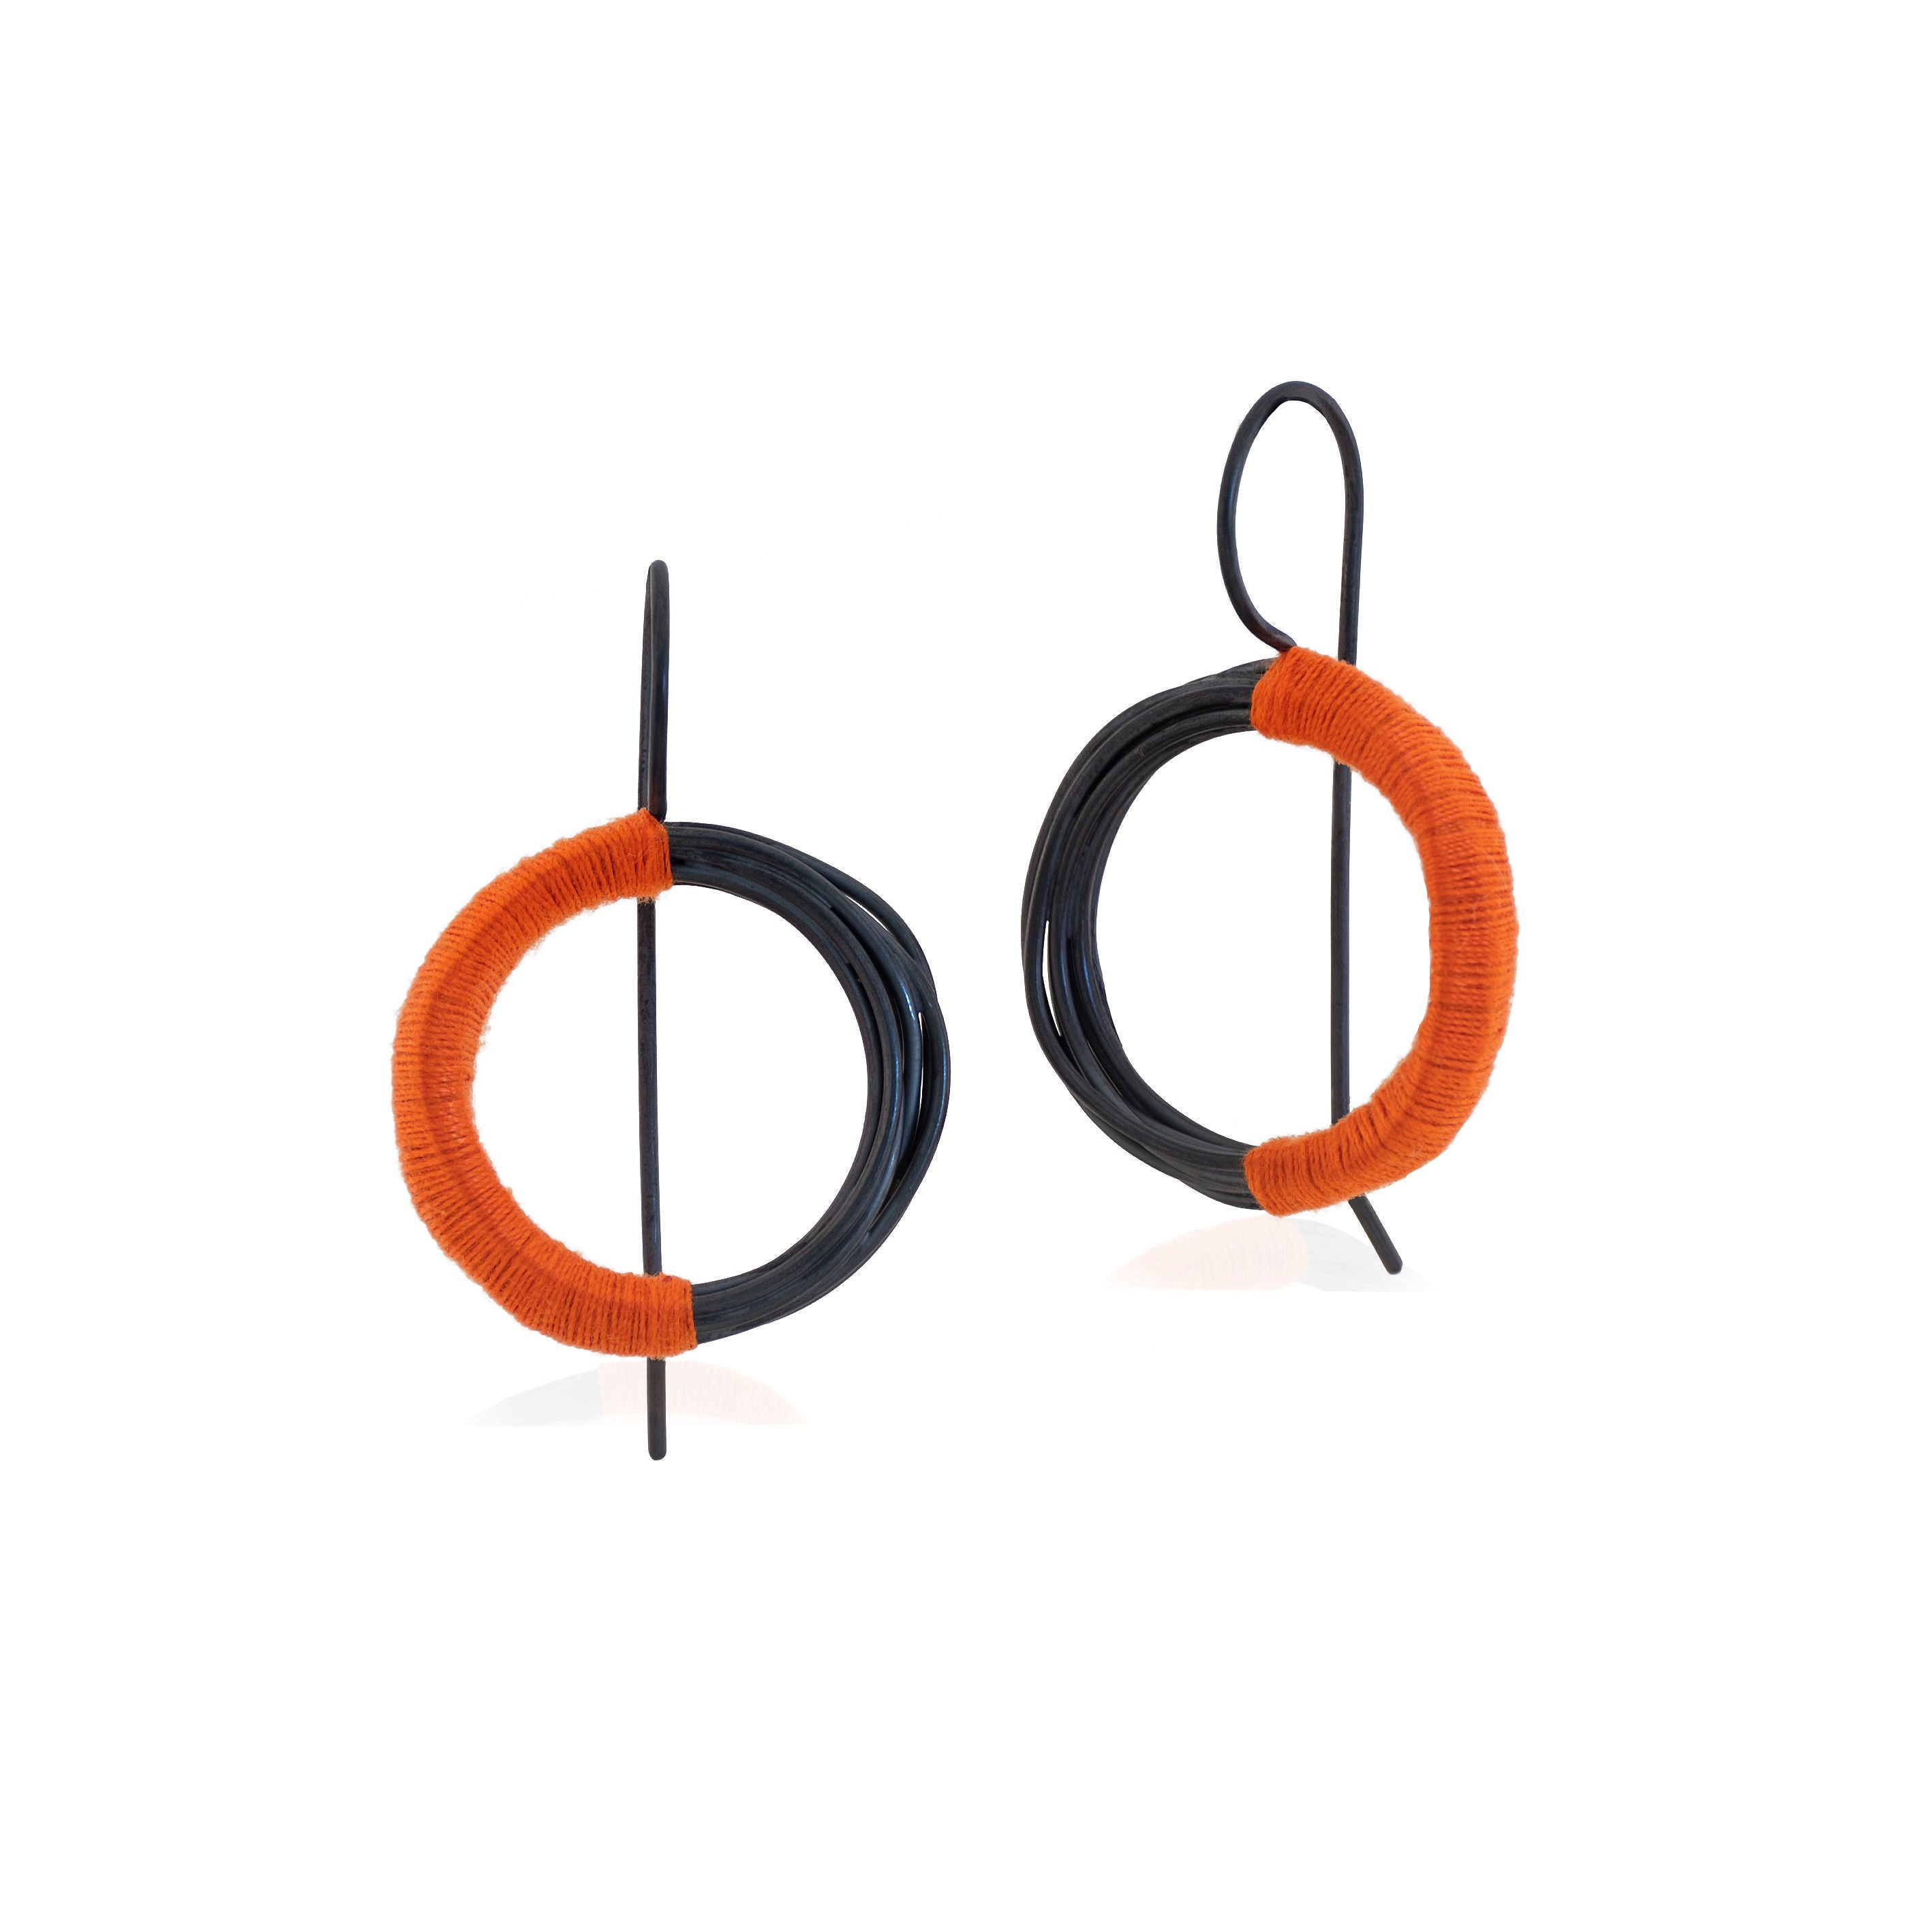 Large Circular Coiled wire Hook Earrings in Oxidized Sterling Silver and wrapped with orange cotton thread handmade in Adelaide, South Australia by Melissa Gillespie Jewellery